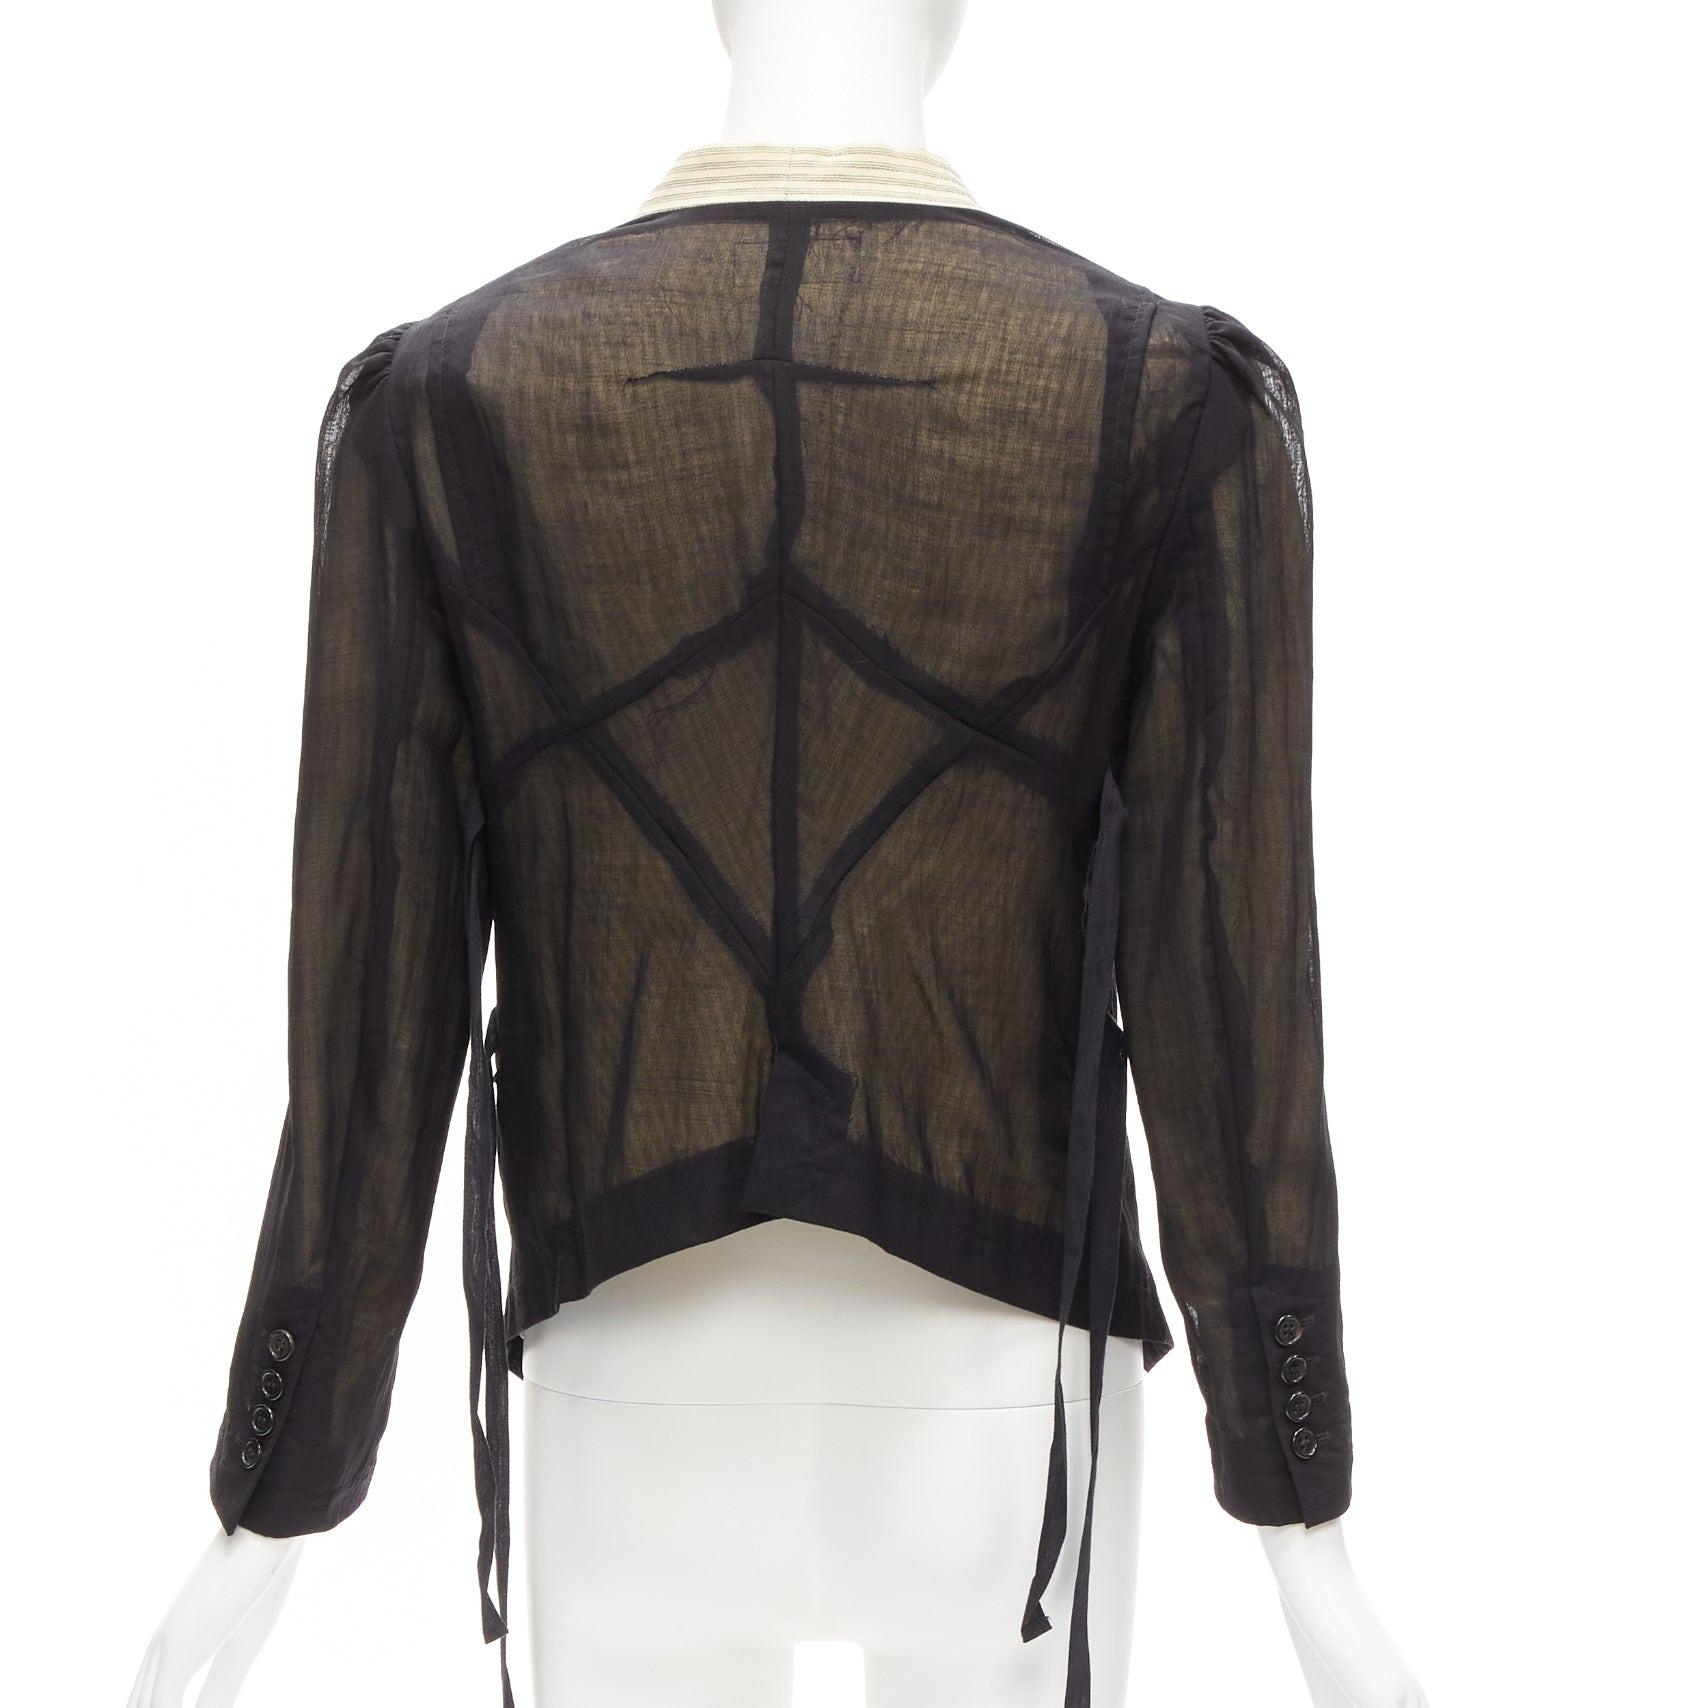 ANN DEMEULEMEESTER black overlay sheer cream topstitched jacket FR36 S
Reference: TGAS/D00722
Brand: Ann Demeulemeester
Designer: Ann Demeulemeester
Material: Virgin Wool, Blend
Color: Black, Cream
Pattern: Striped
Closure: Button
Lining: Cream